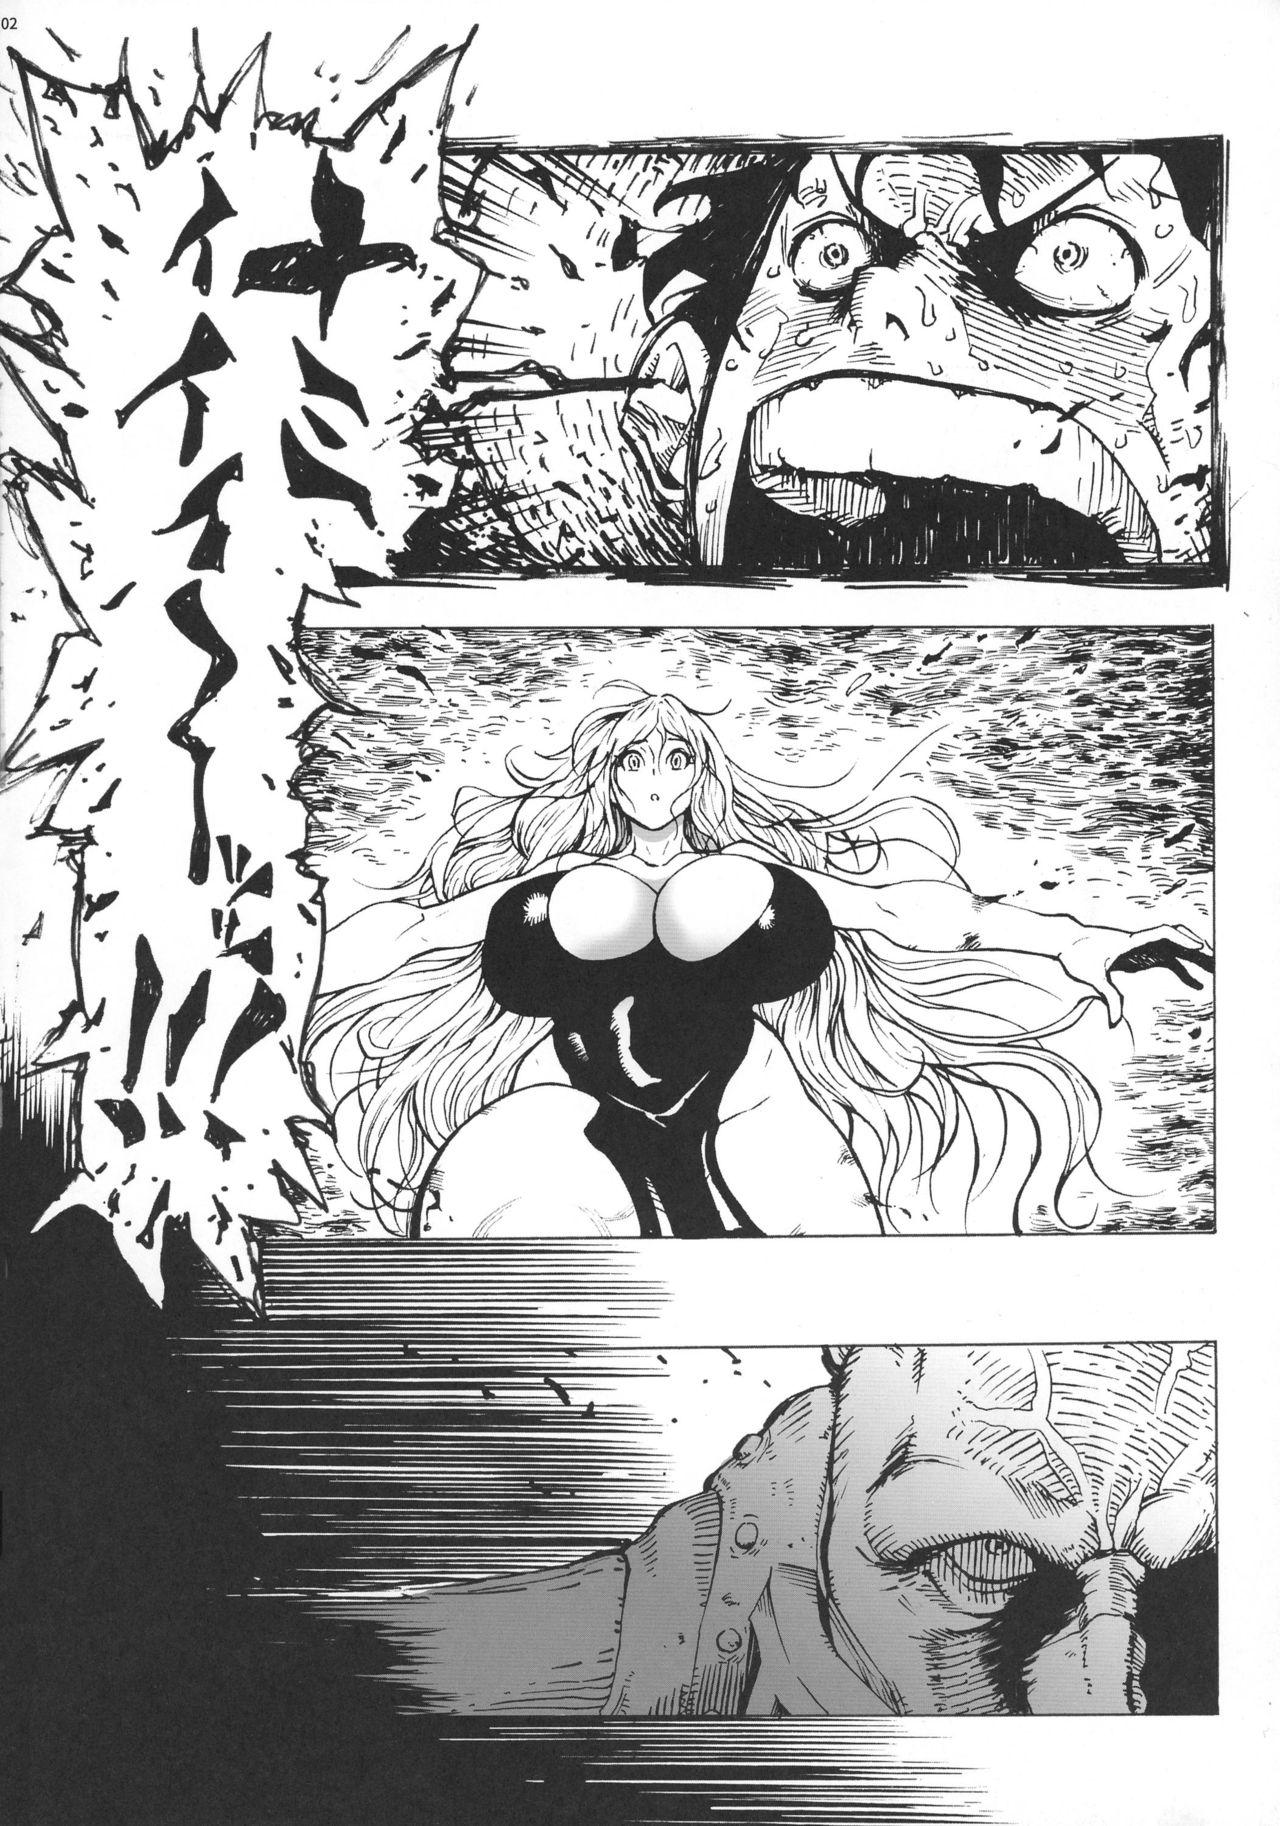 Exhibitionist P.O.M Another Episode "J.A.C.K" - One piece Assfucking - Page 4